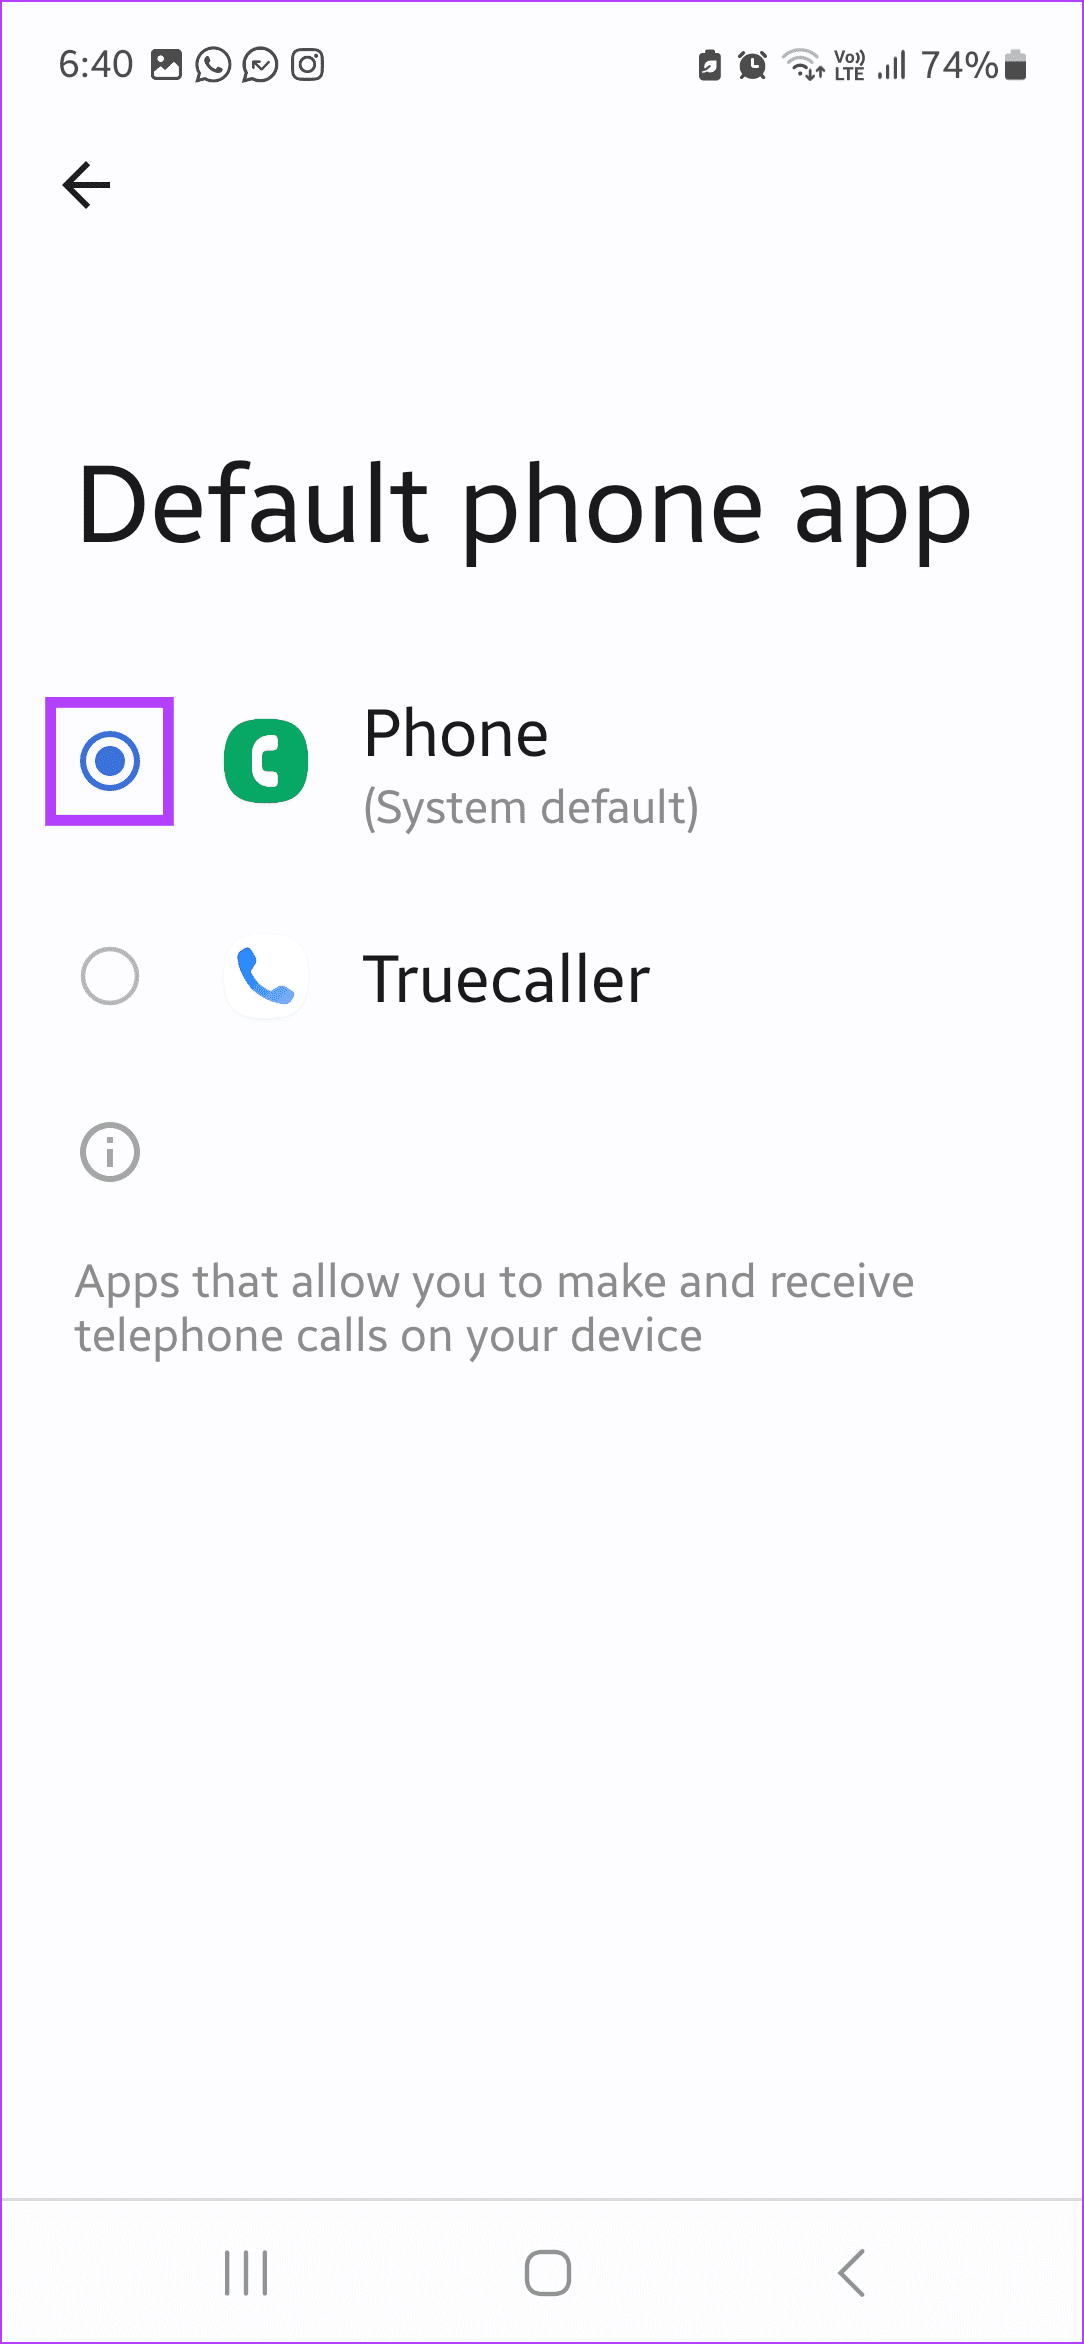 Select the Phone app